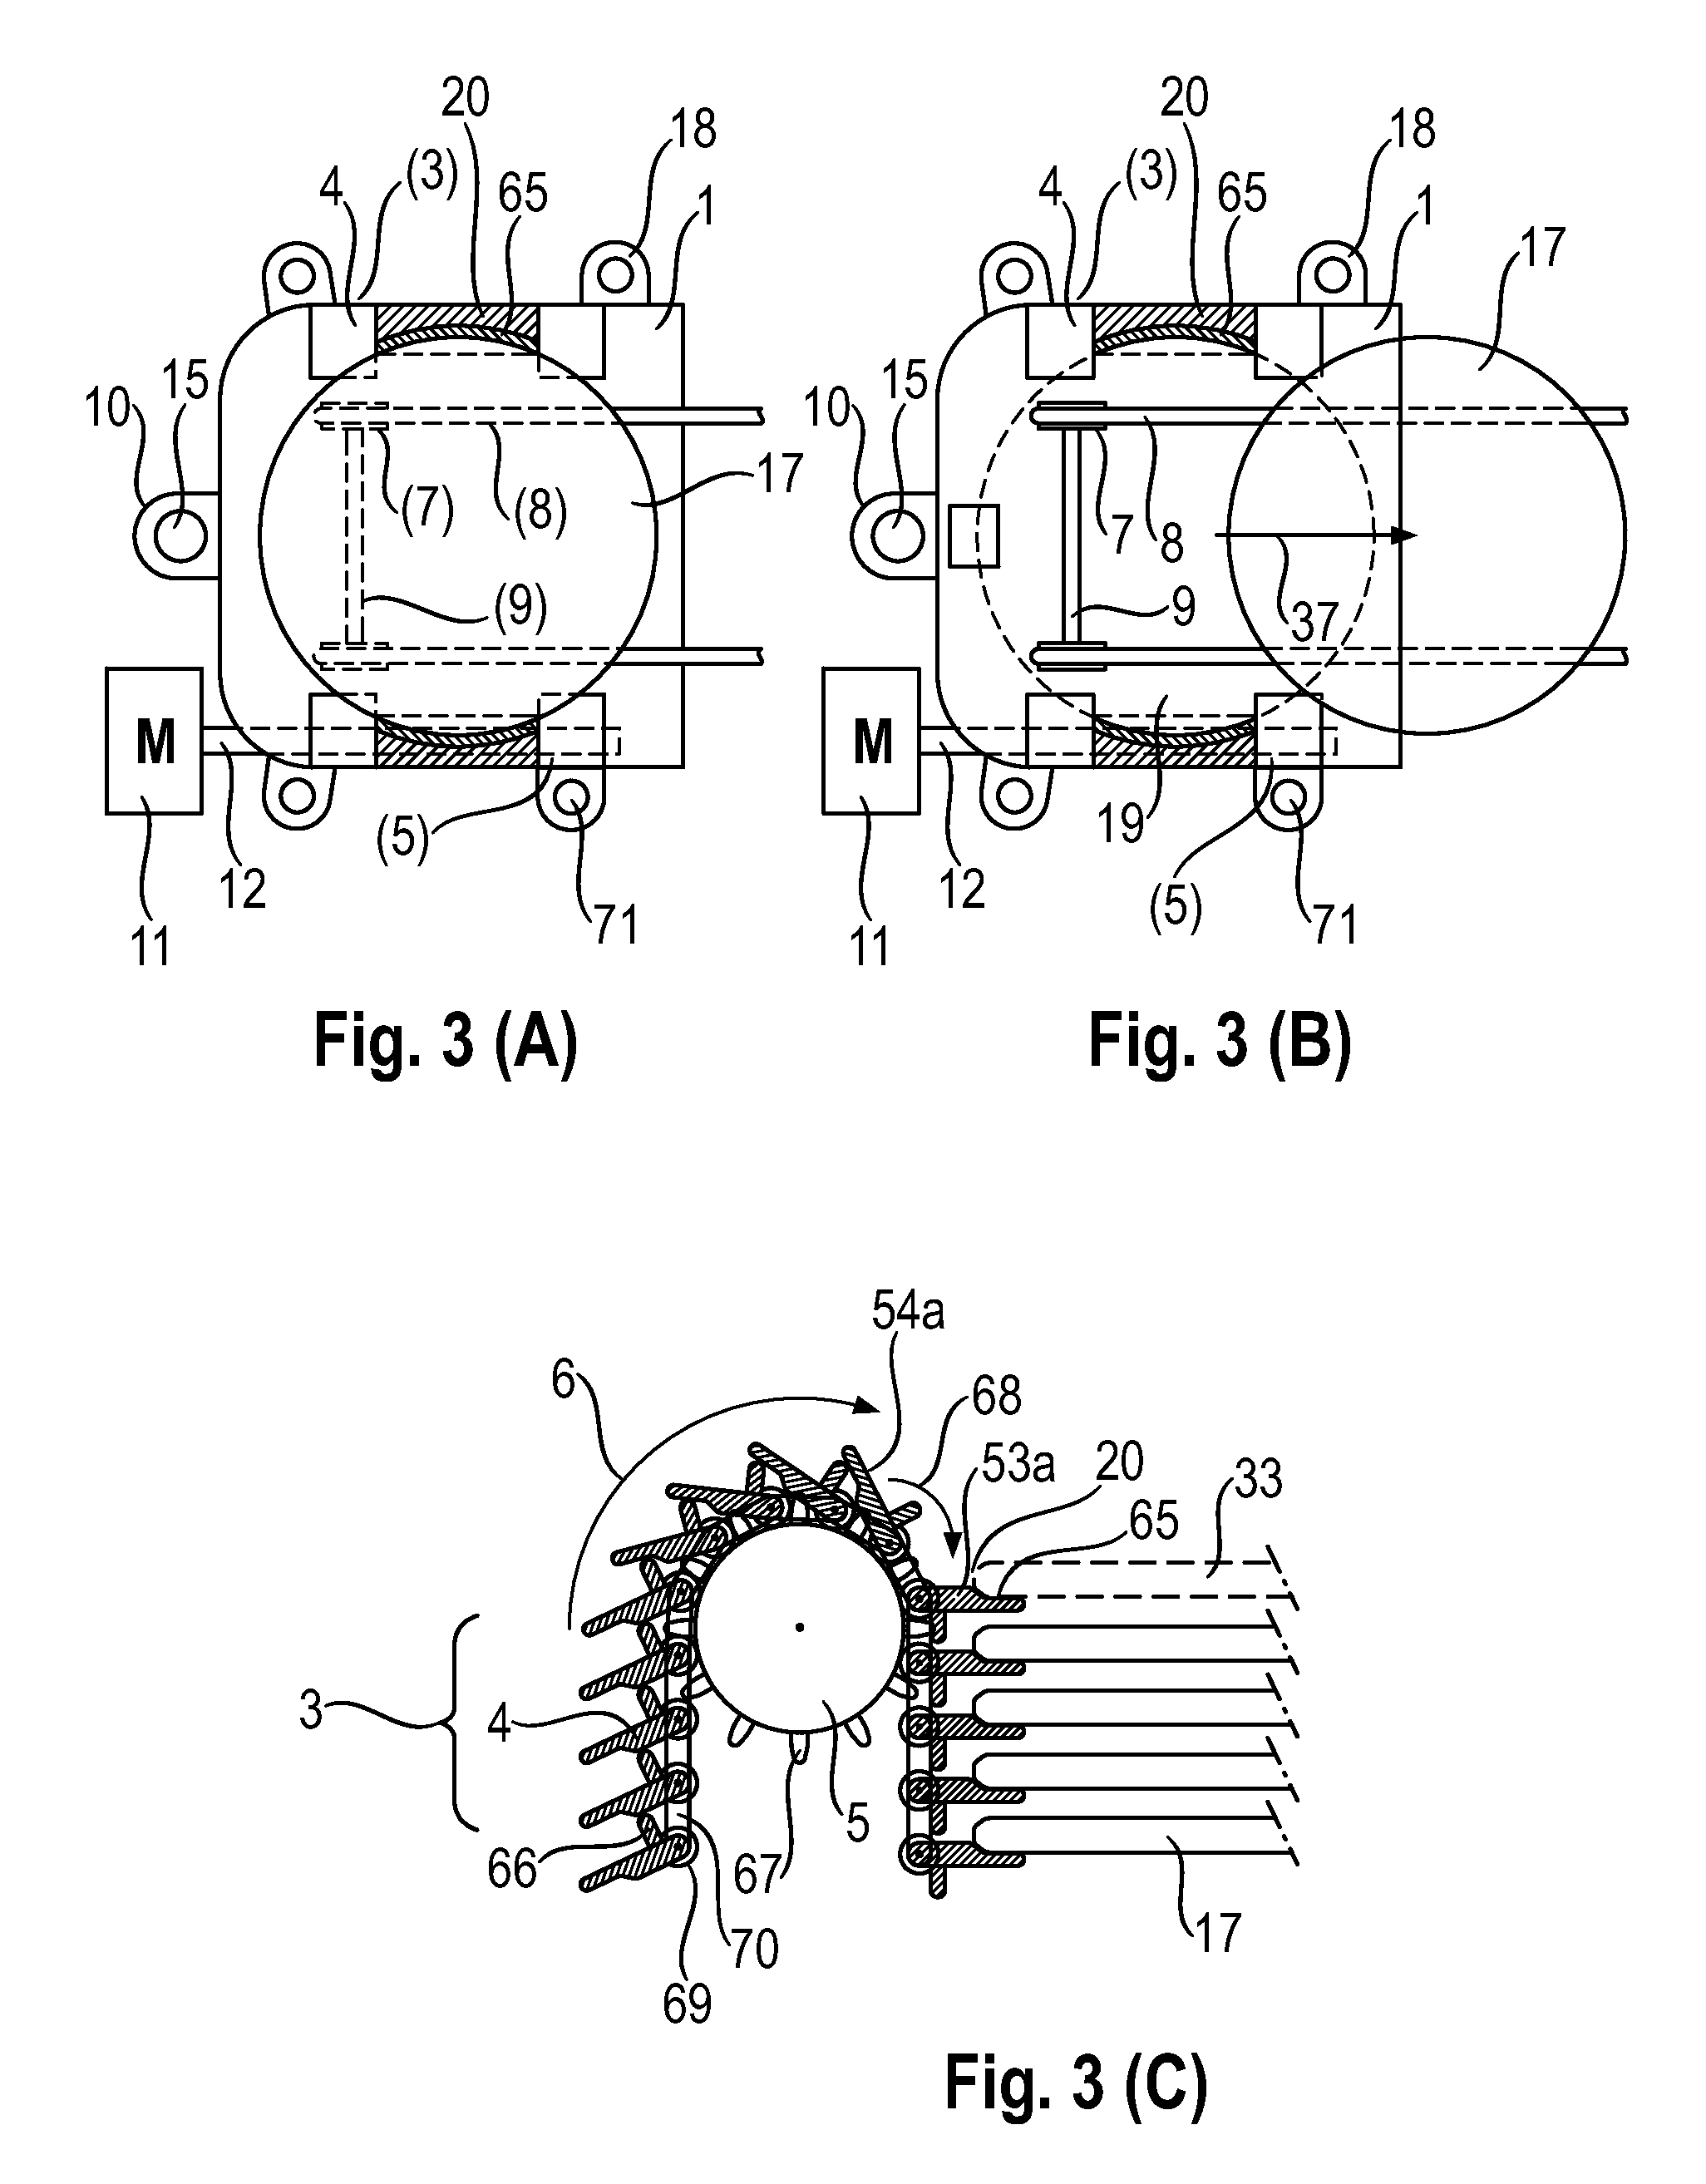 Device and Method For Buffer-Storing A Multiplicity of Wafer-Type Workpieces